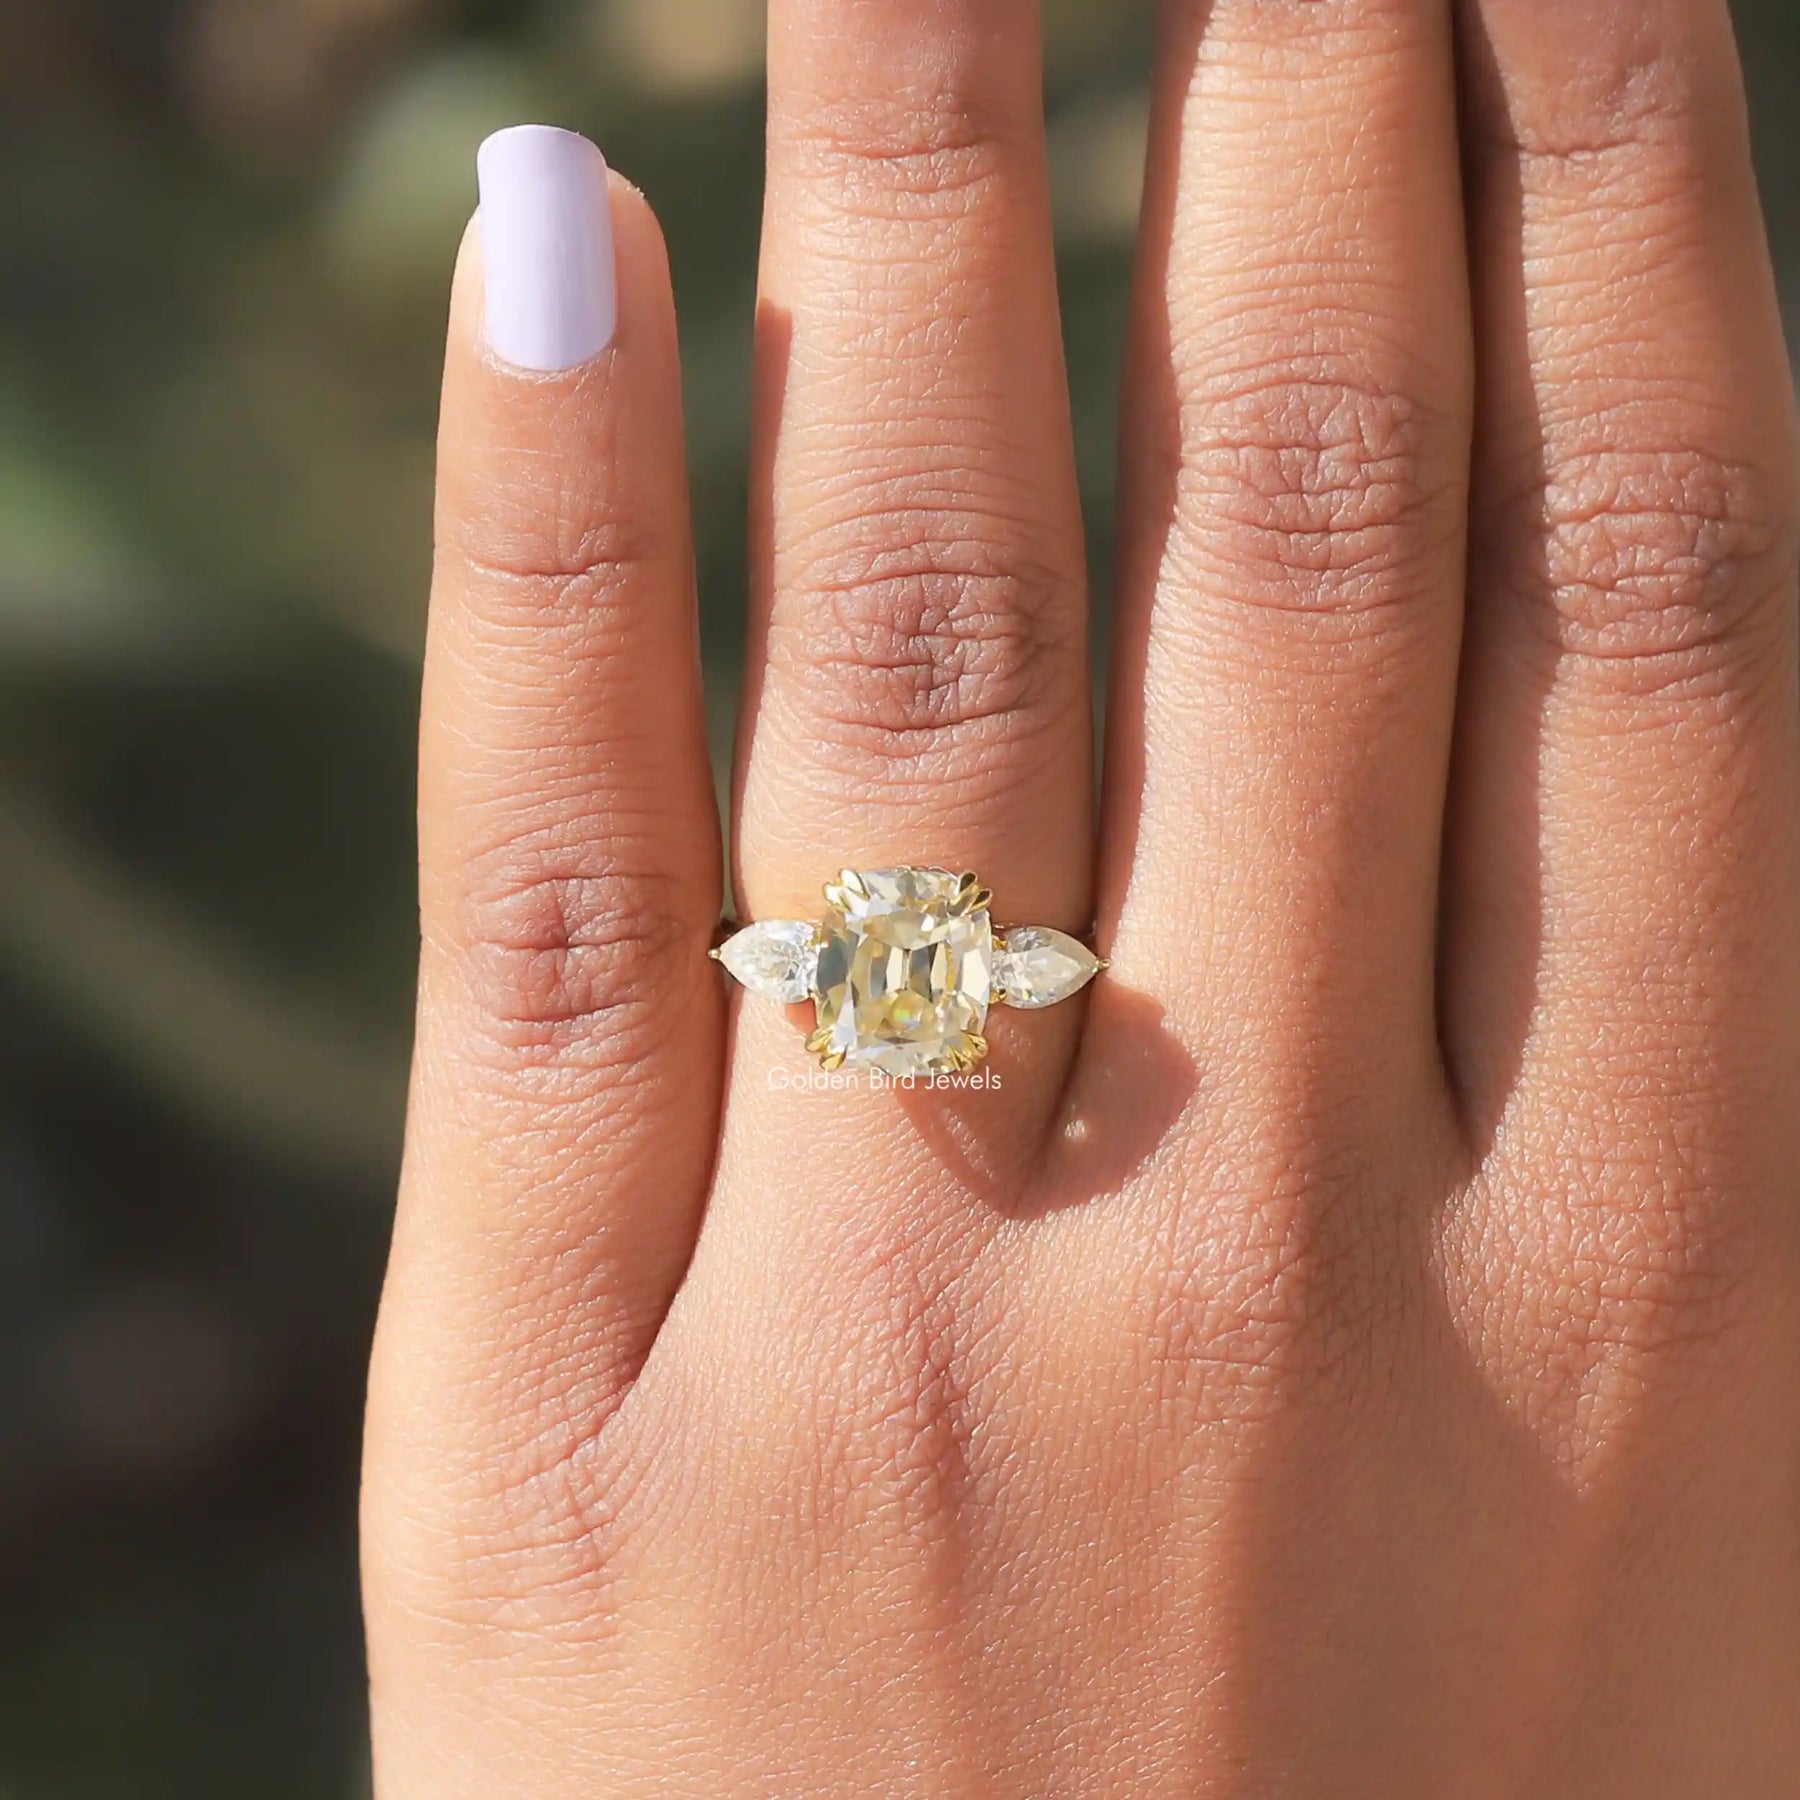 [Off White Cushion And Pear Cut Moissanite Ring]-[Golden Bird Jewels]